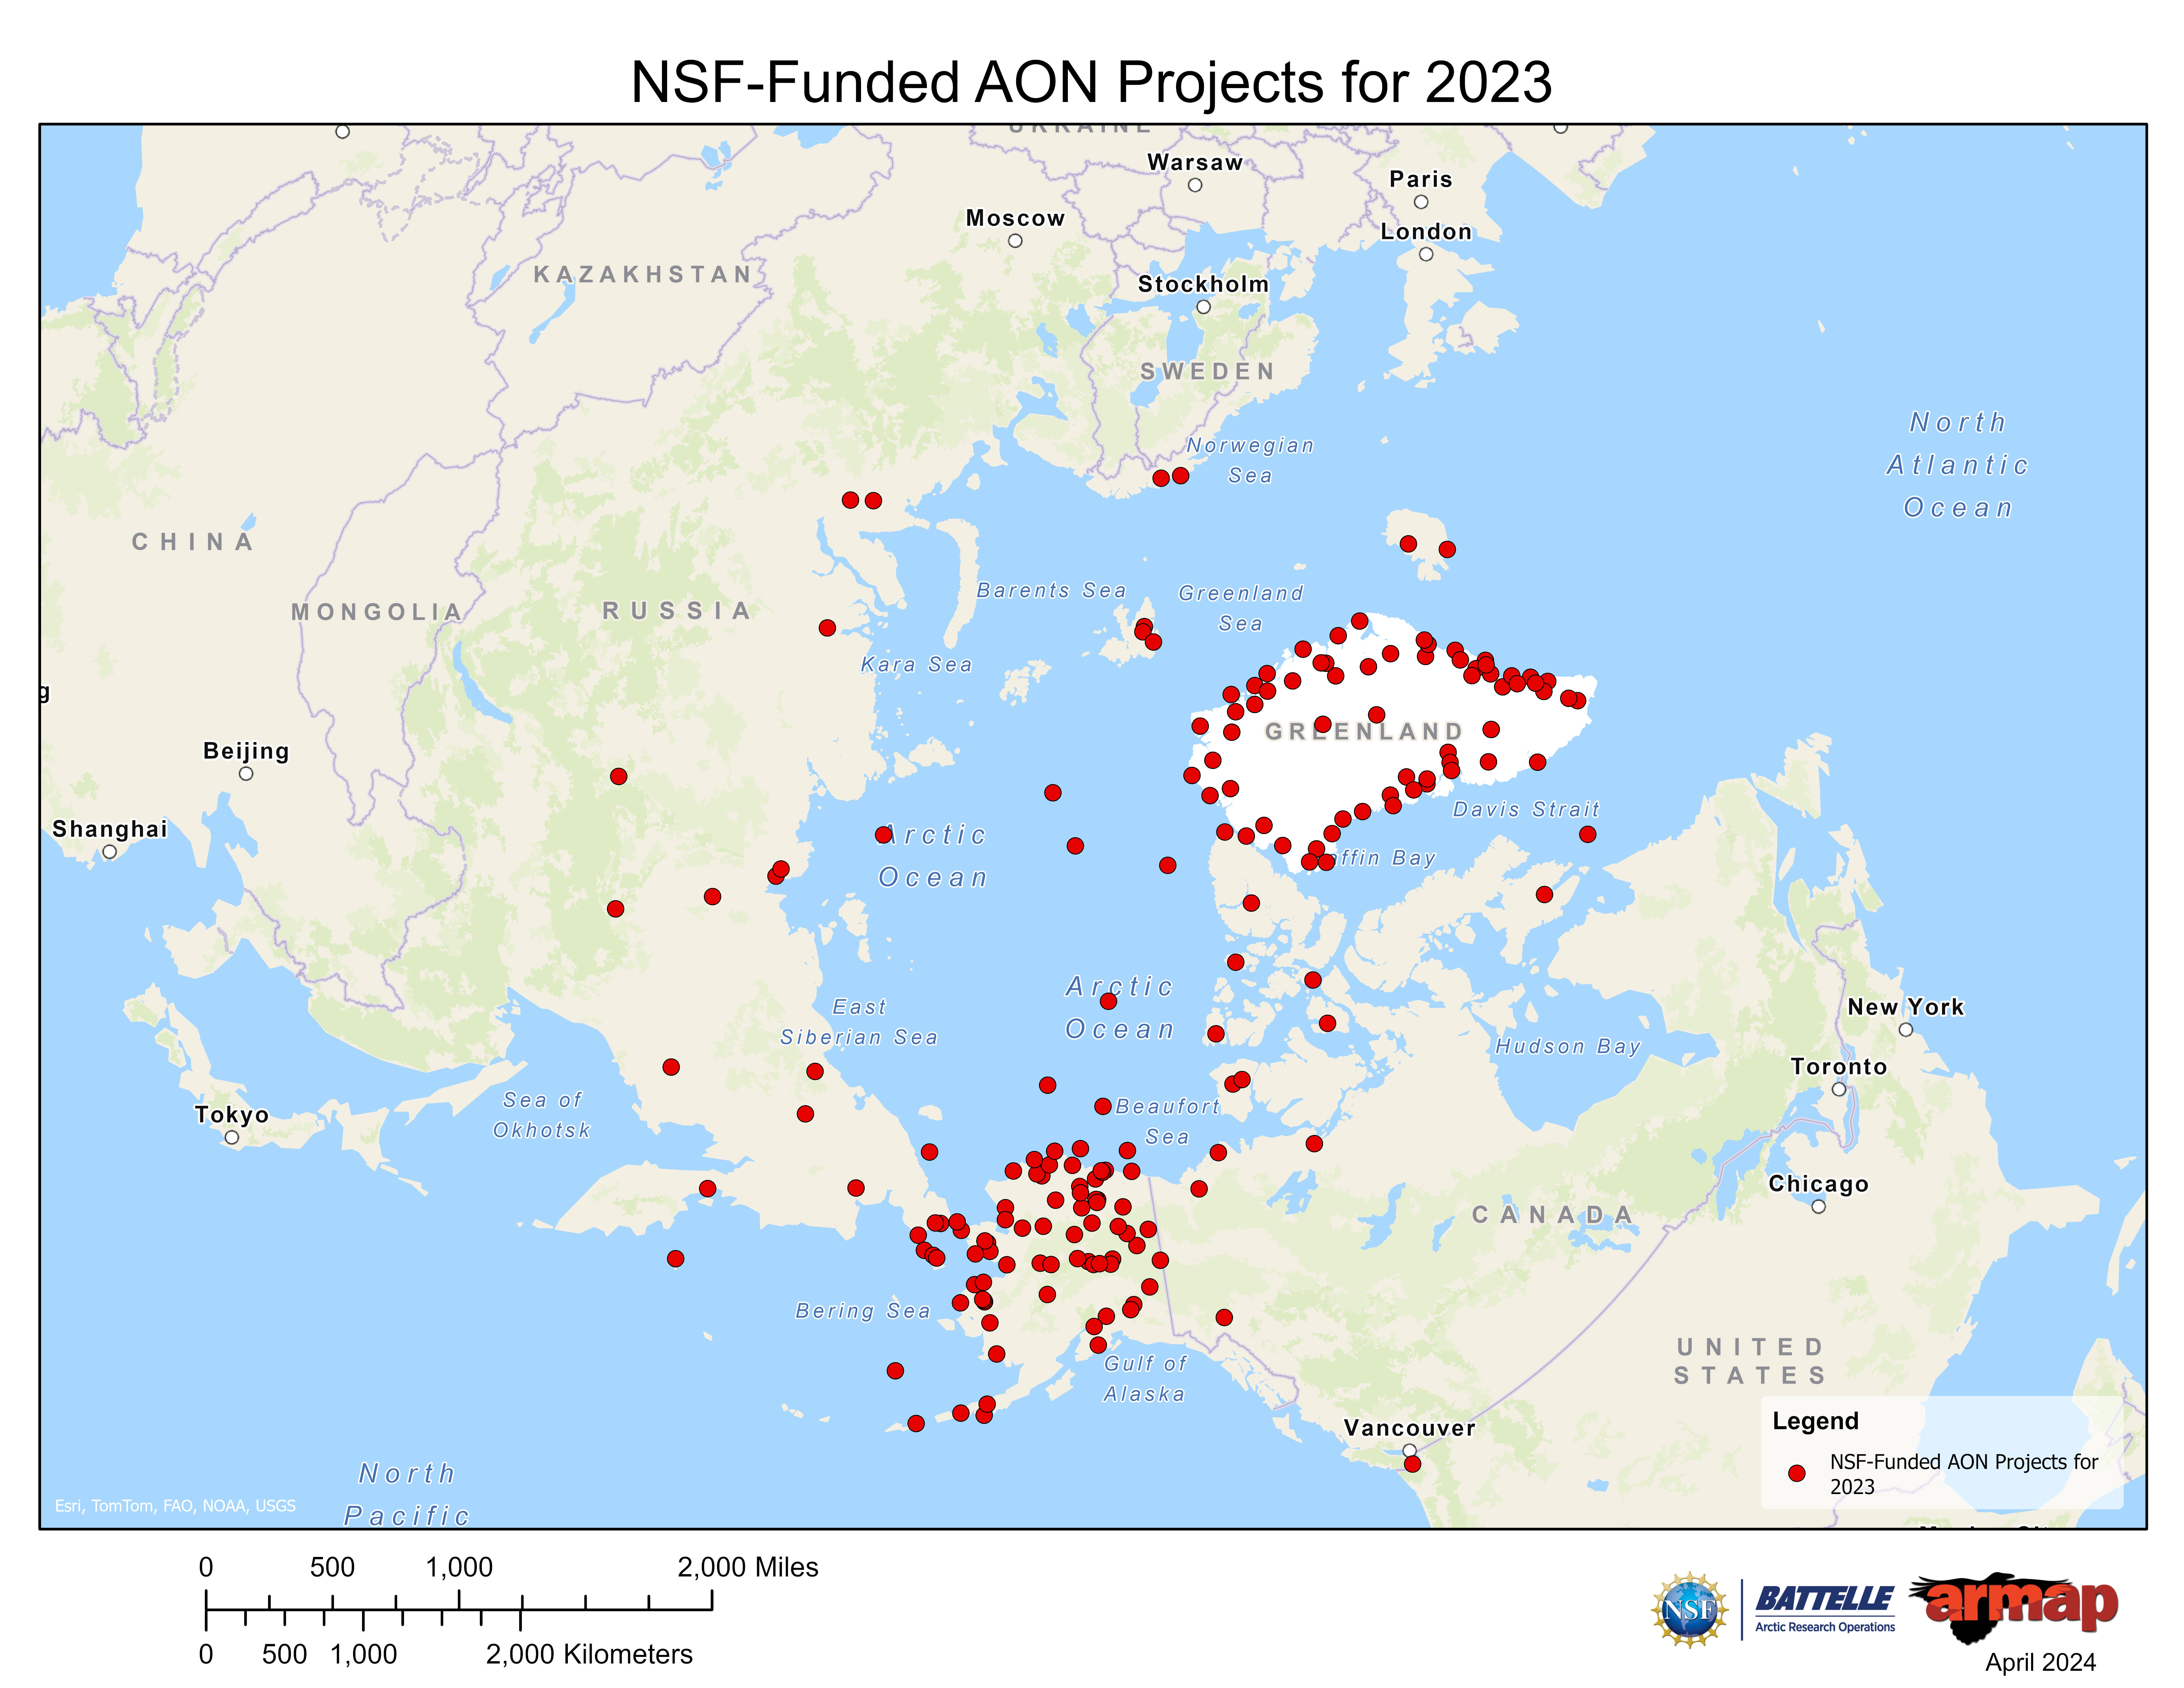 NSF-Funded AON Projects last Year